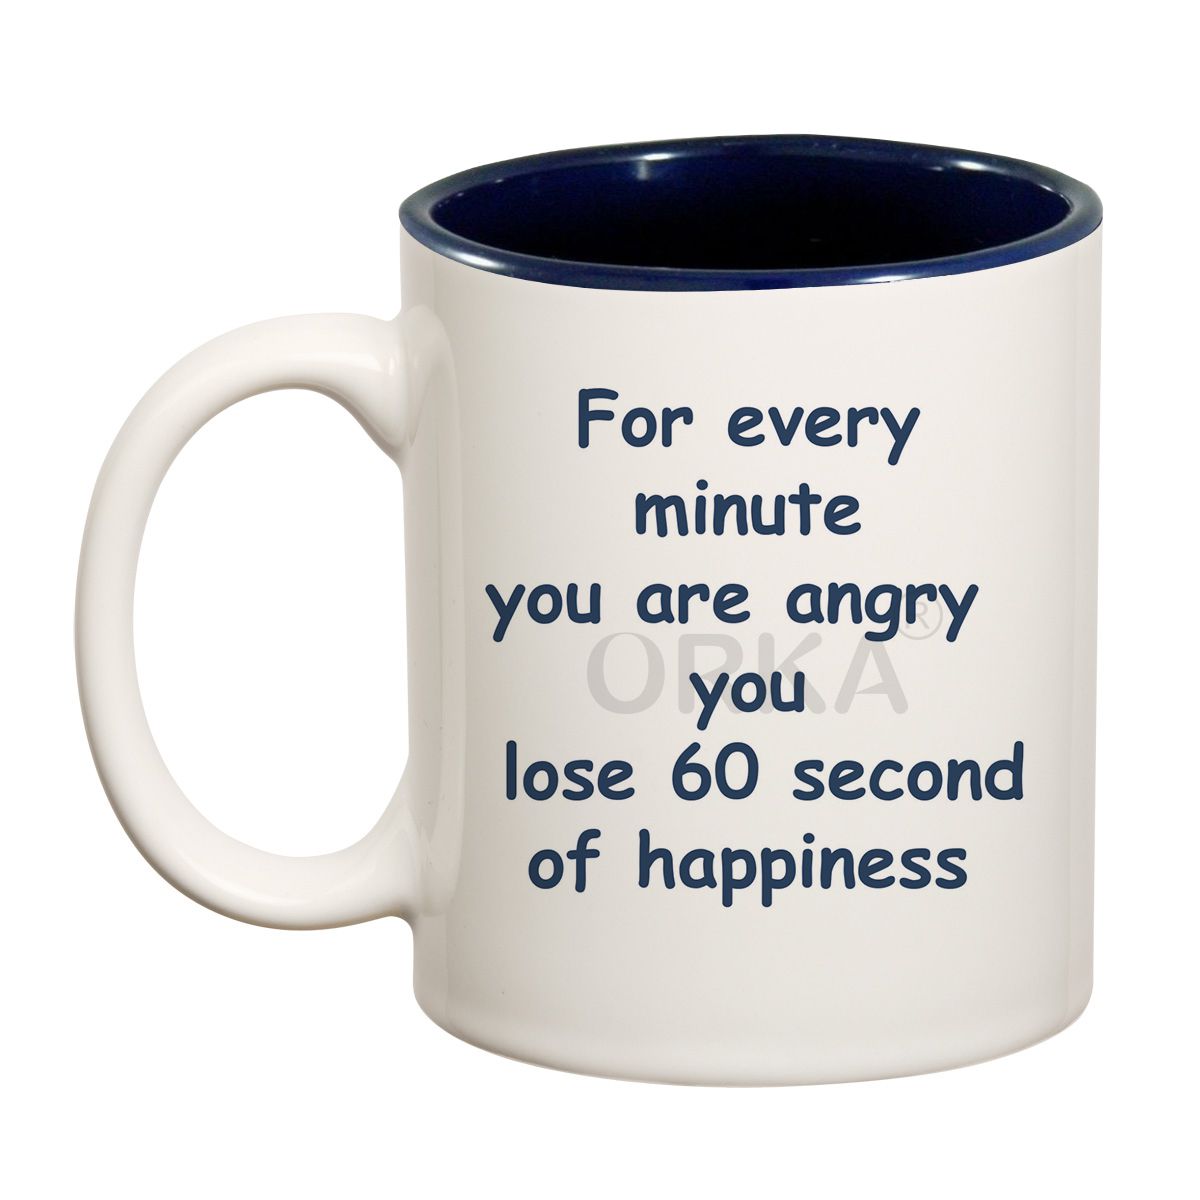 ORKA Coffee Mug Quotes Printed(For Every Minute....) Theme 11 Oz   